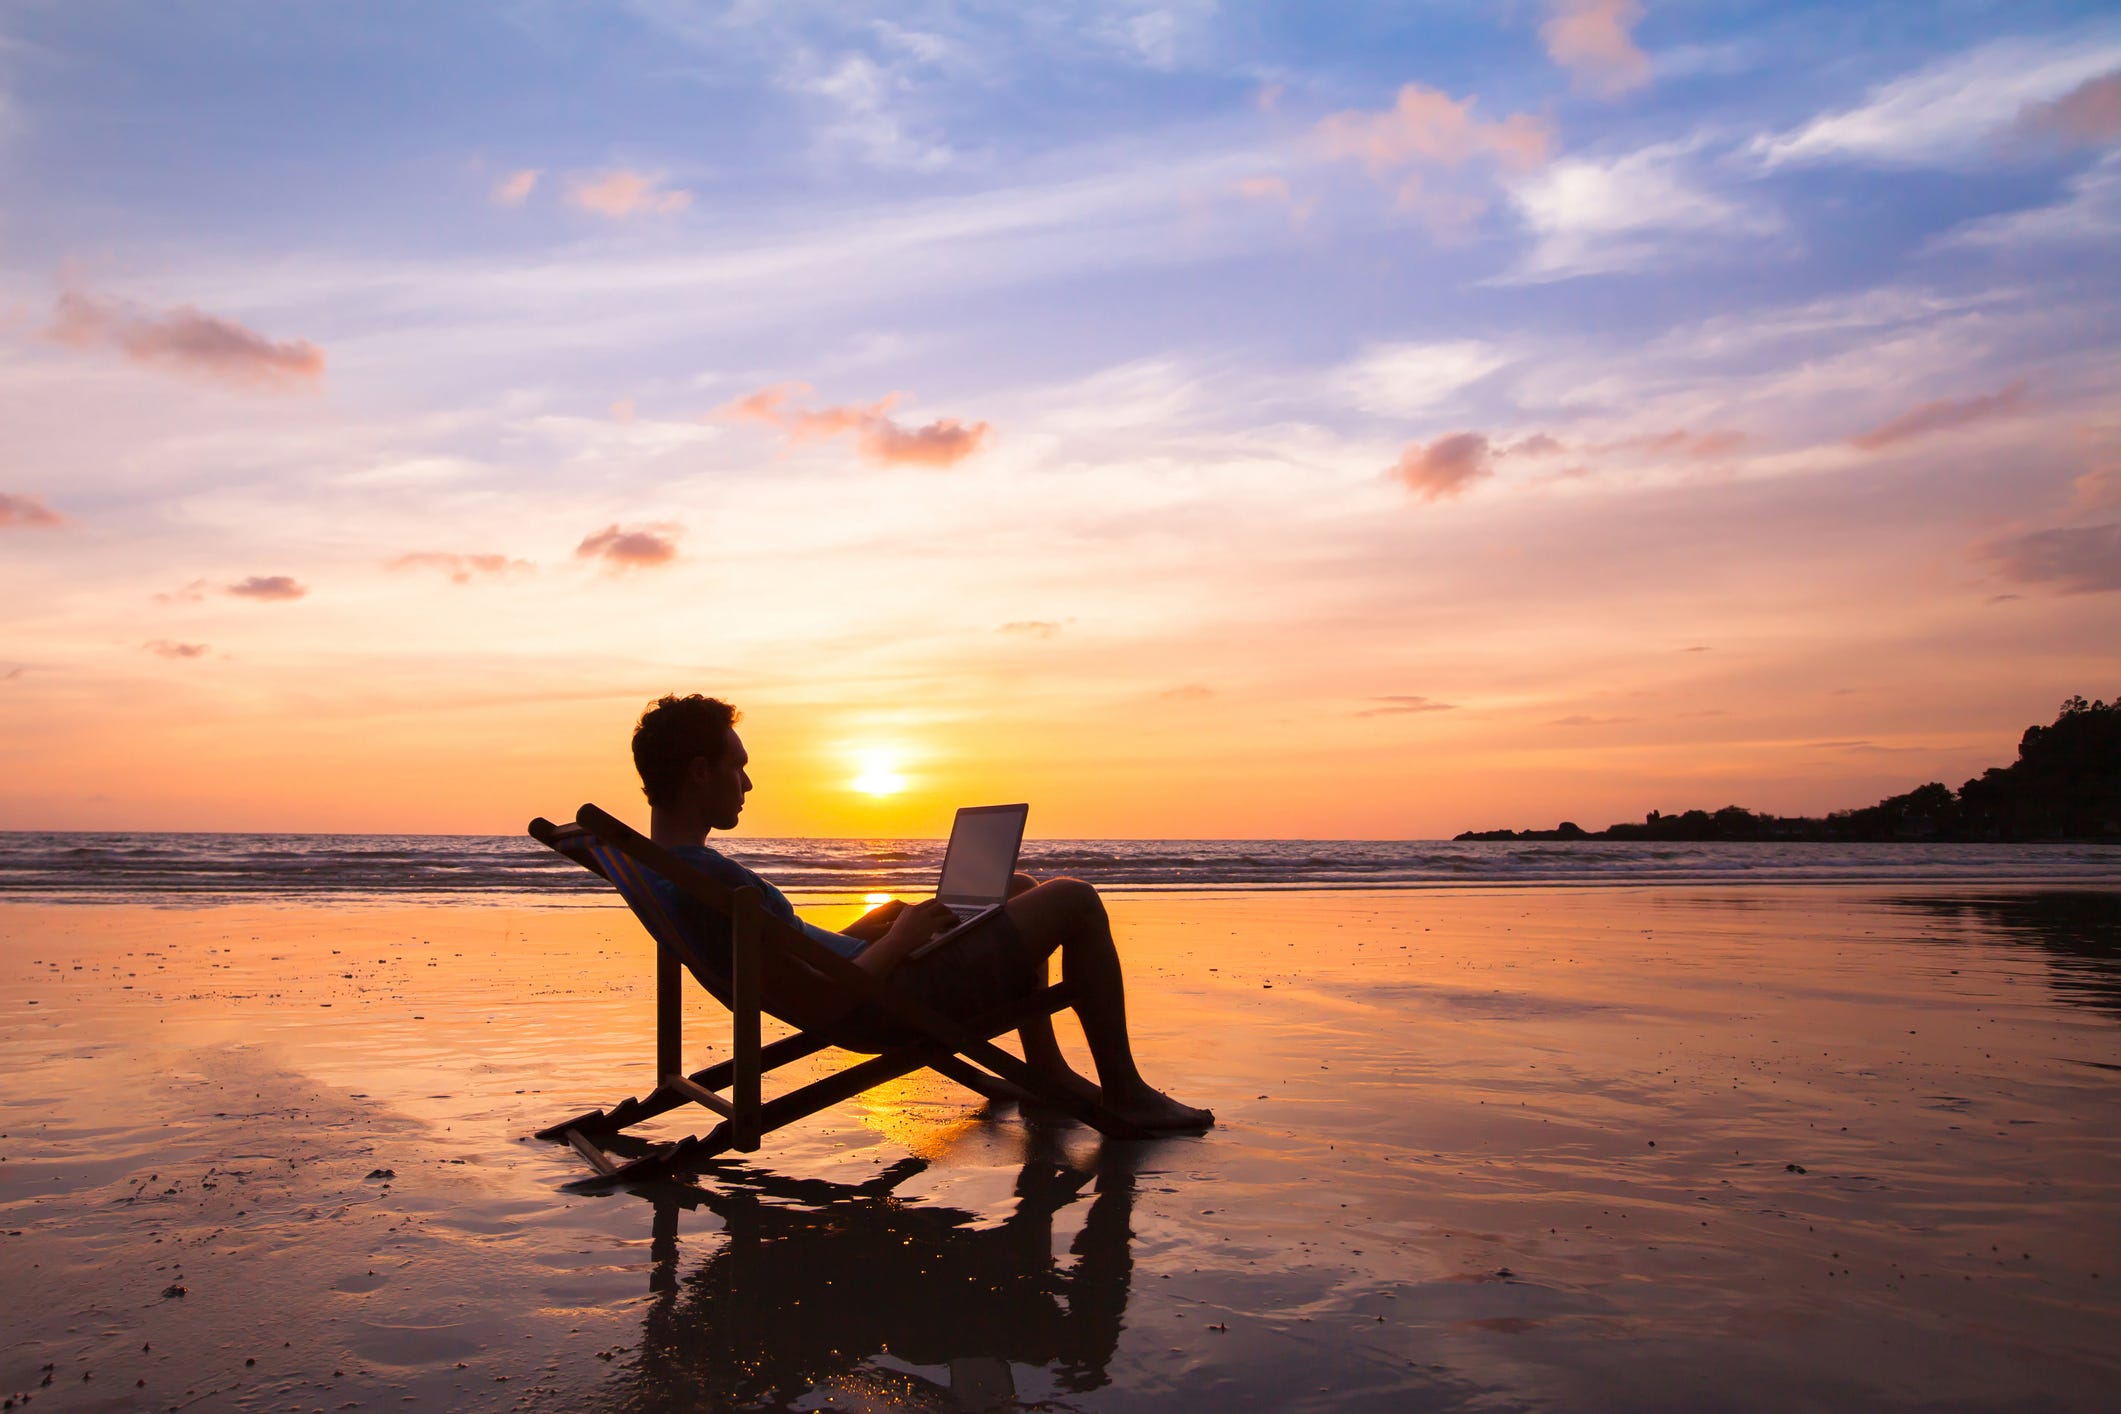 1 in 3 remote workers go on vacation without telling boss [Video]